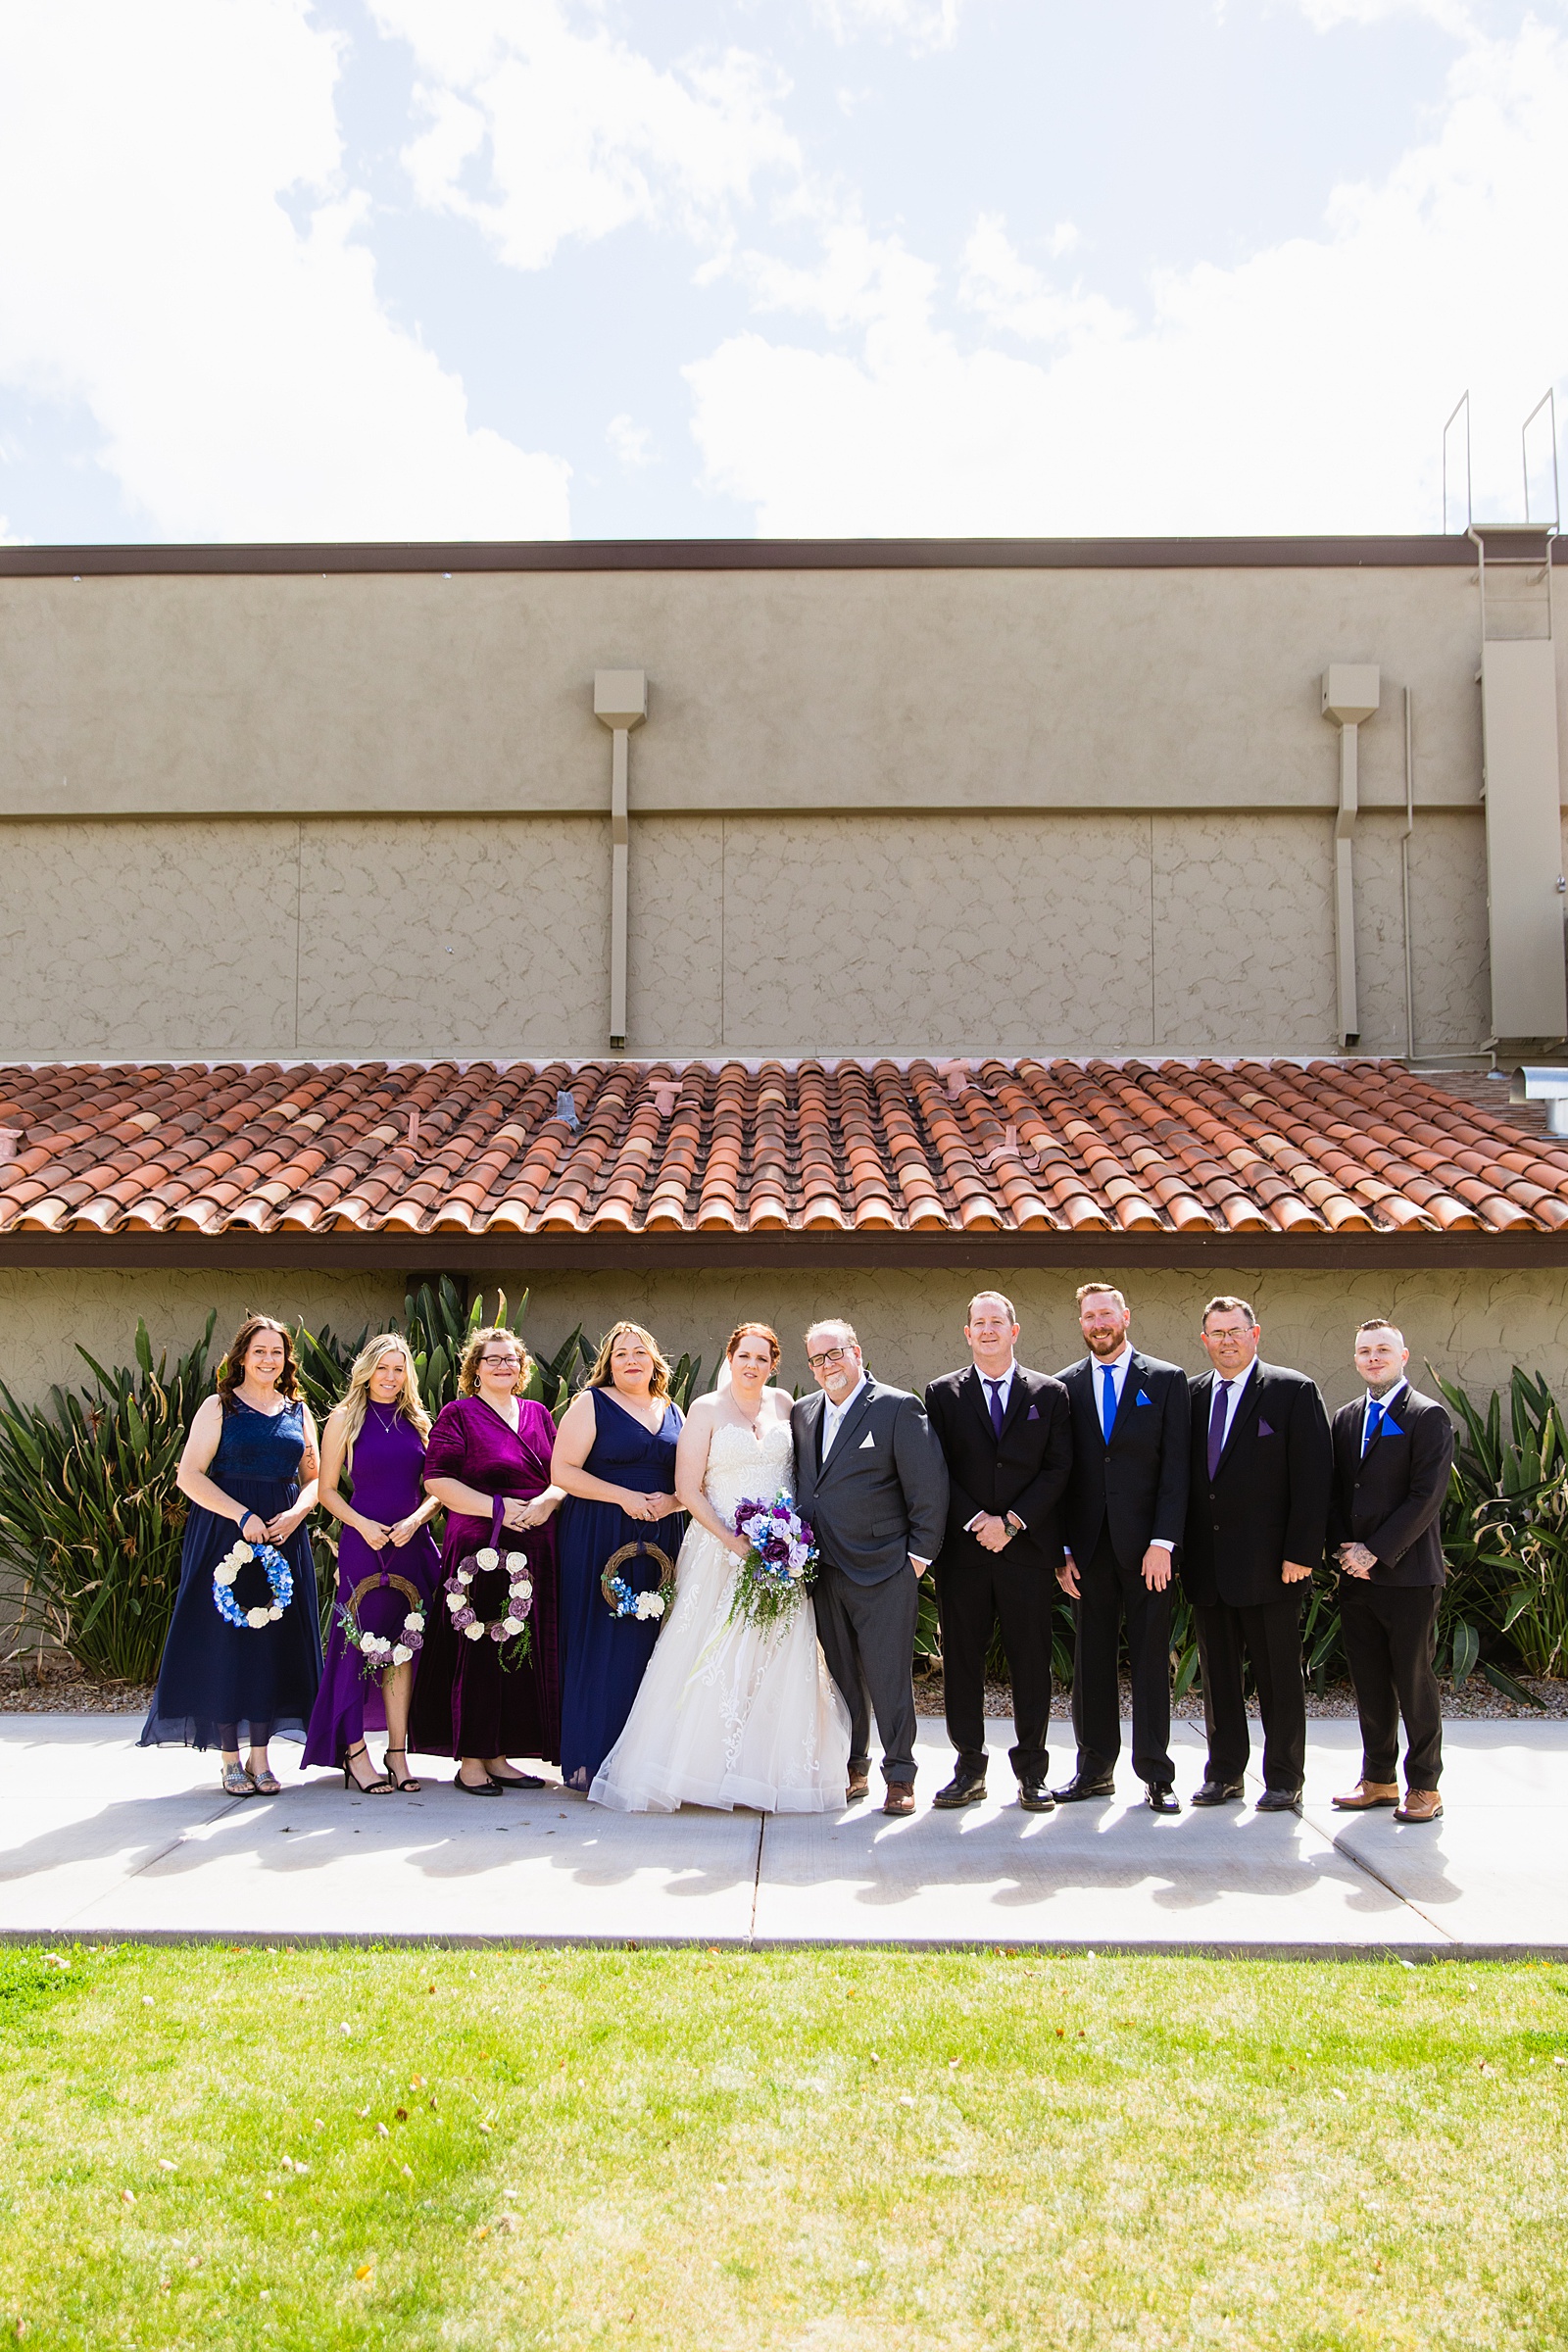 Bridal party together at a Sun Valley Church wedding by Arizona wedding photographer PMA Photography.